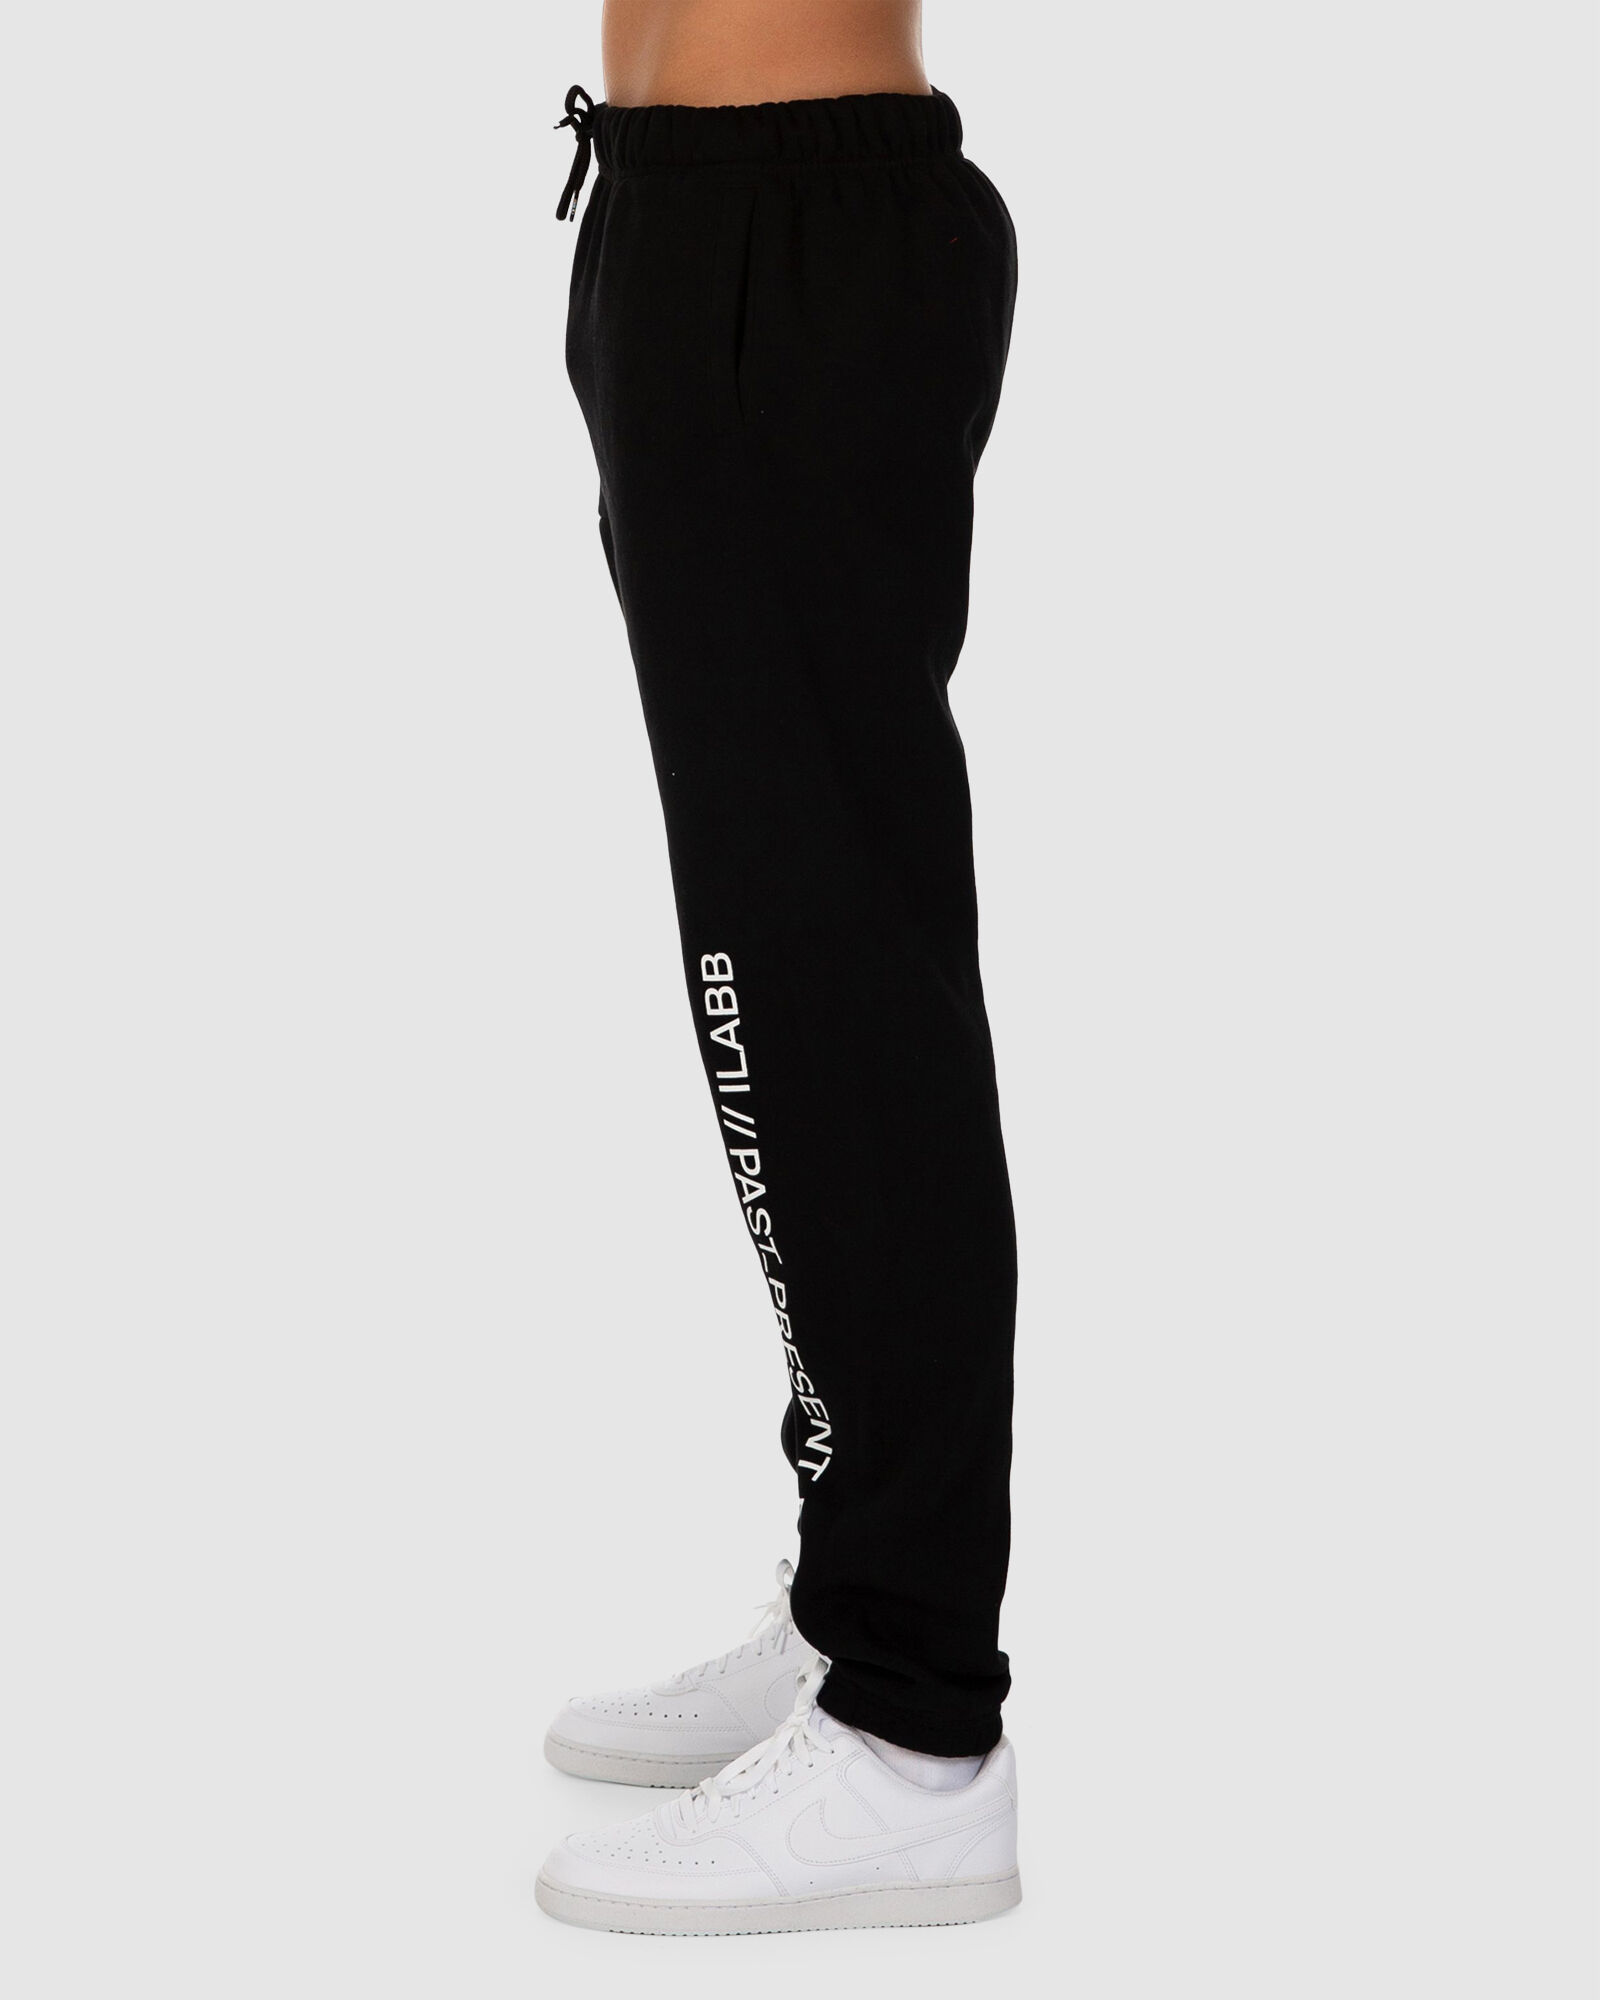 Mens Panel Trackie by ILABB | Amazon Surf